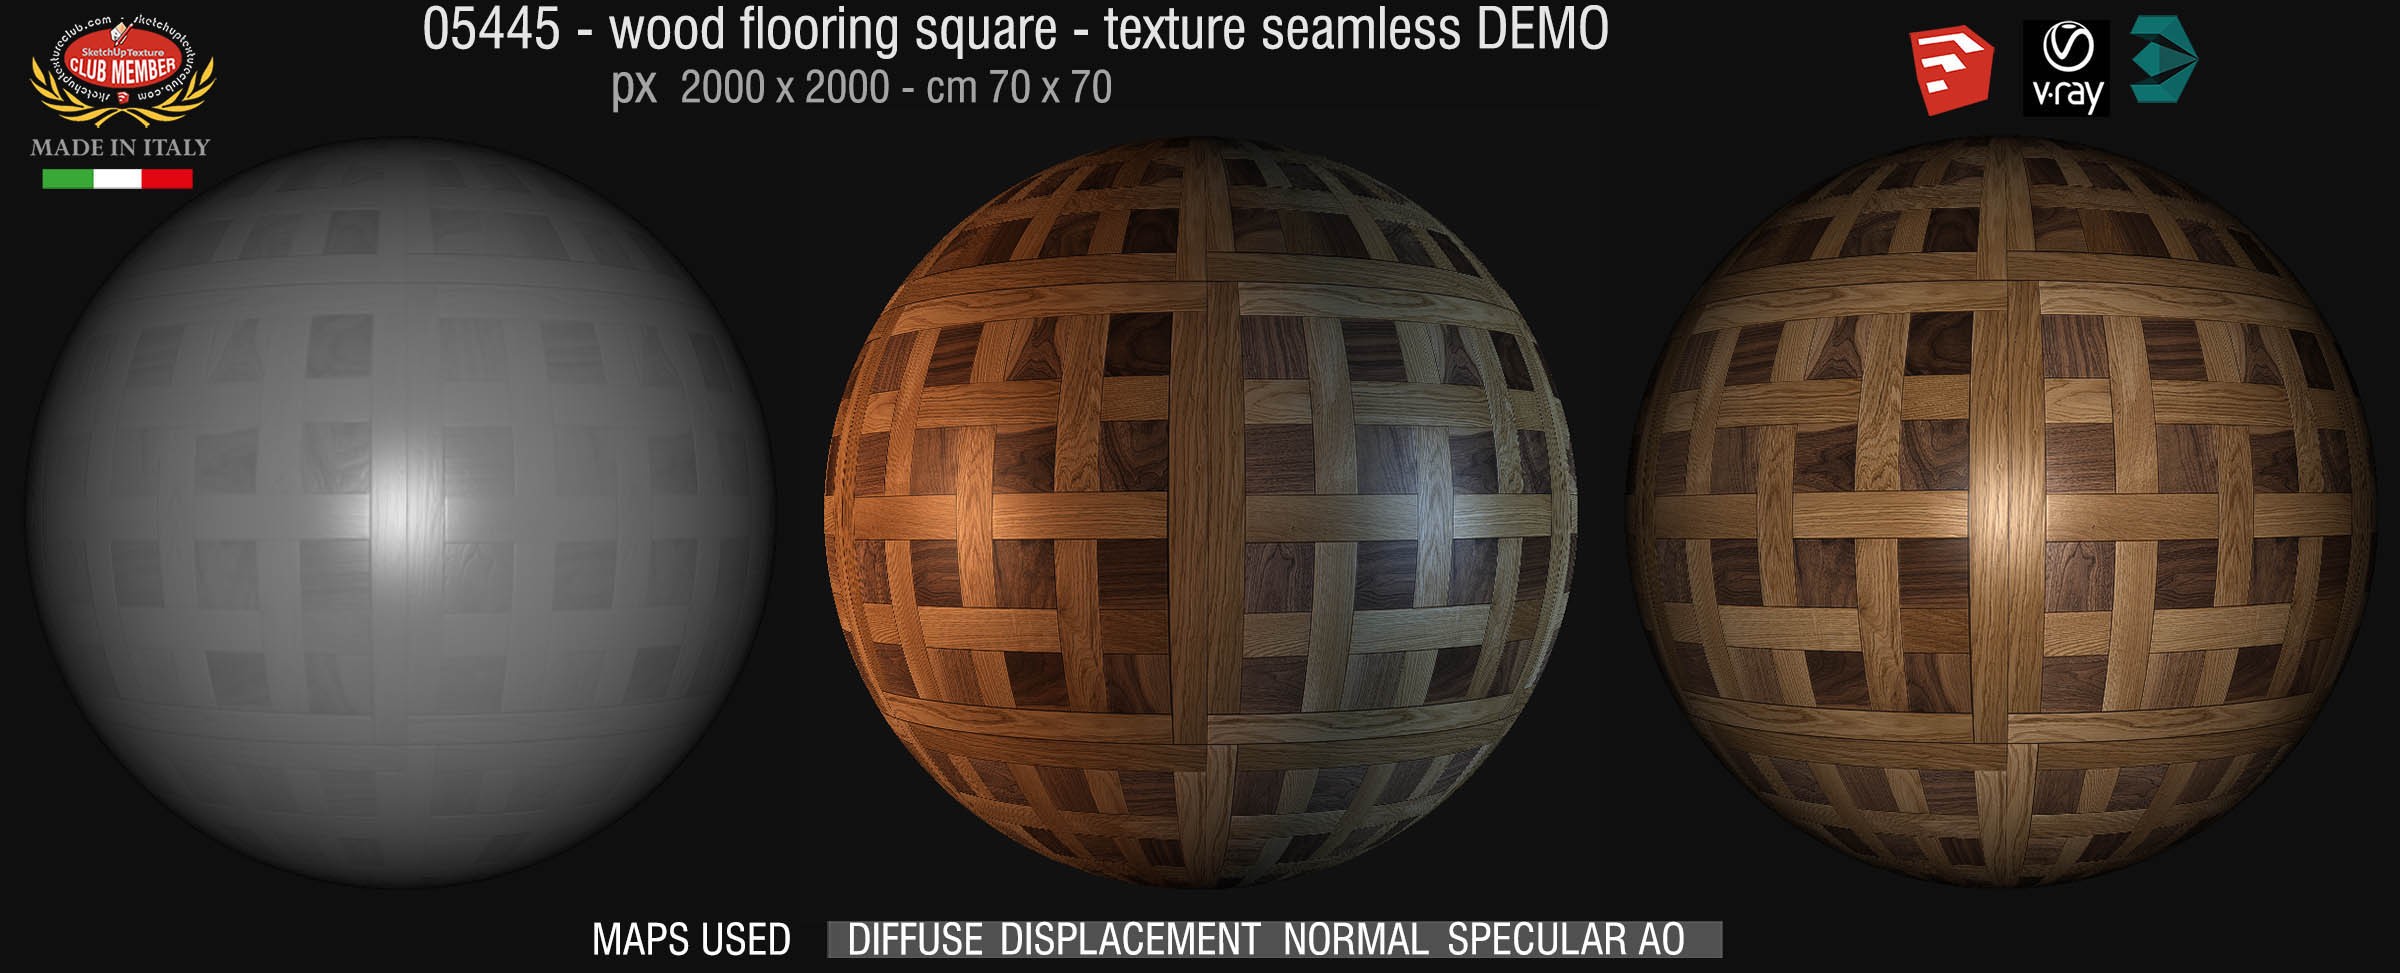 05445 Wood flooring square texture seamless + maps DEMO